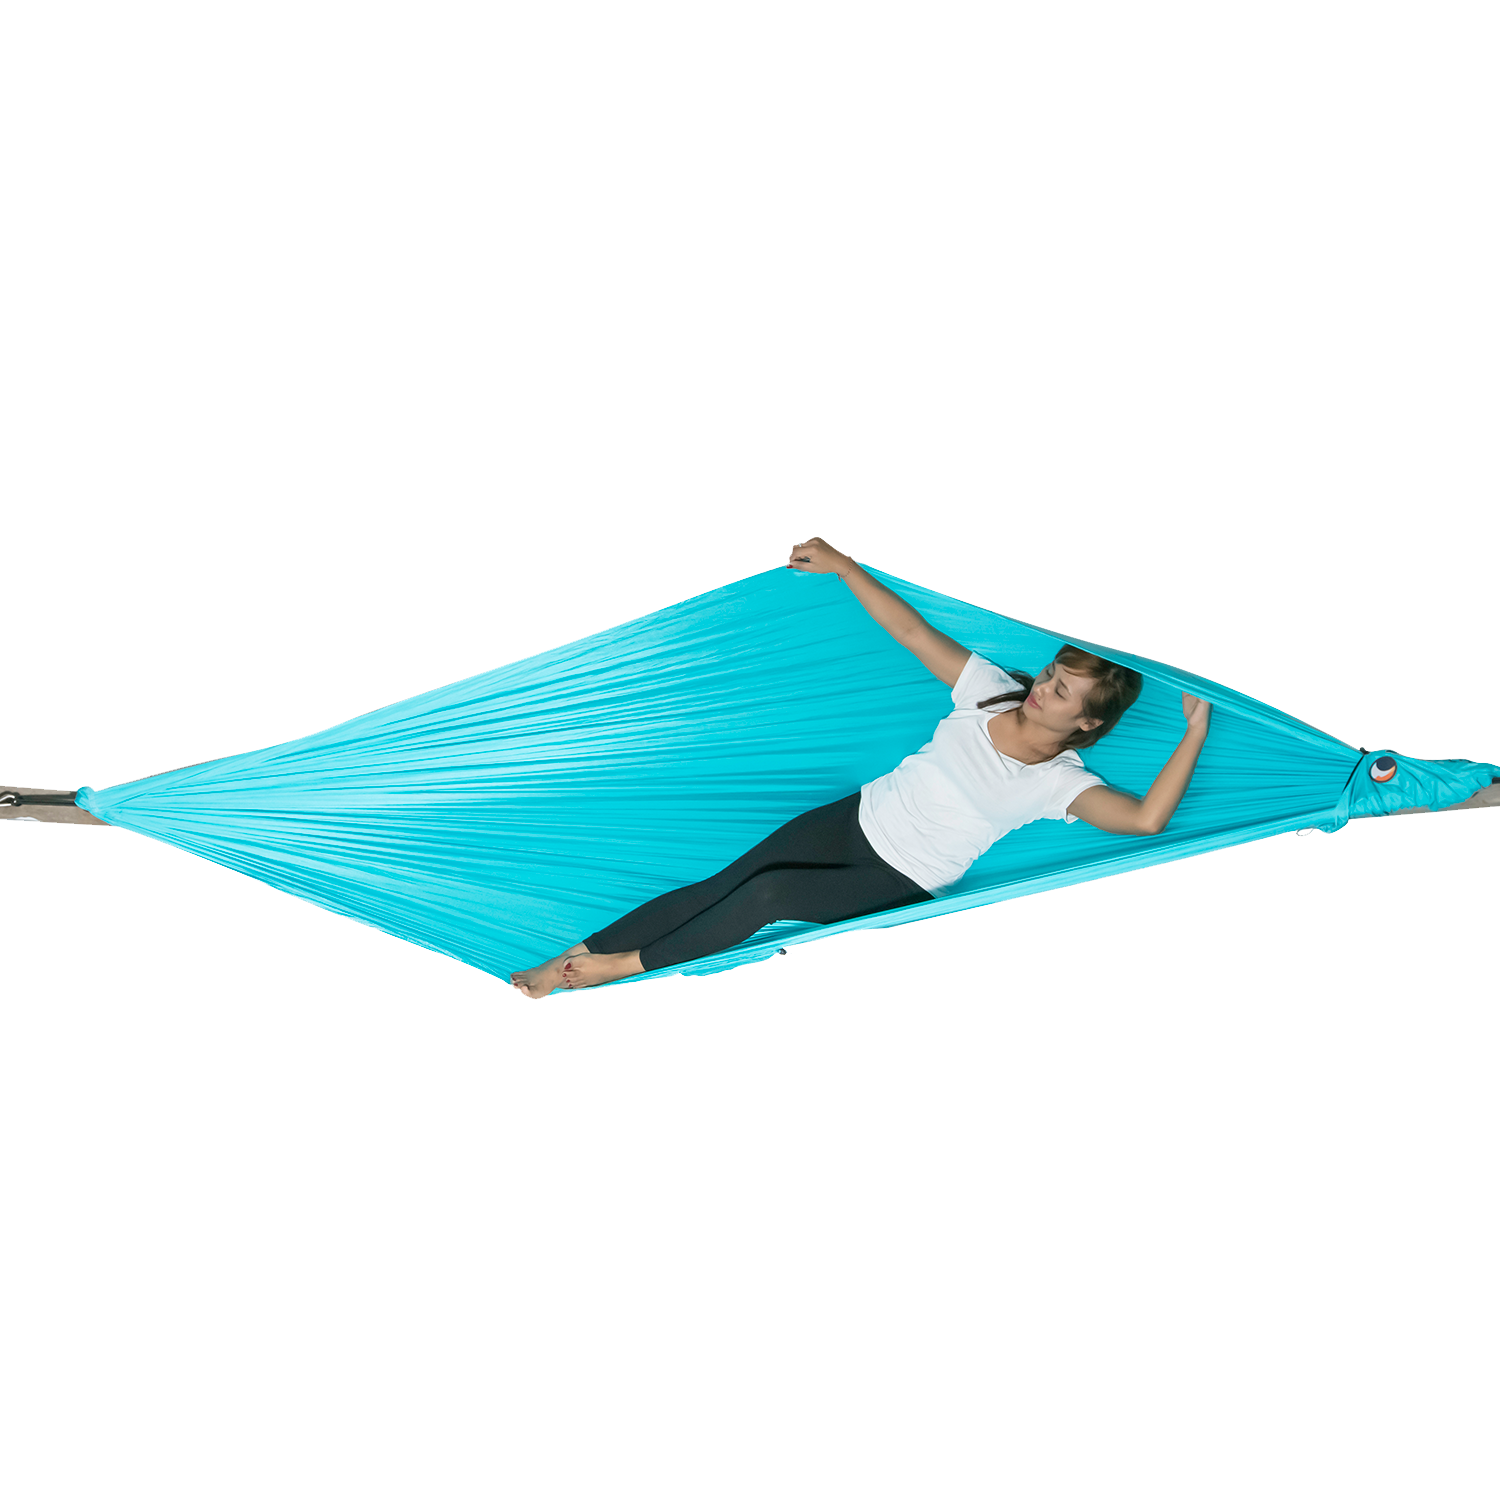 Ticket to the Moon "Compact Hammock" - turquoise